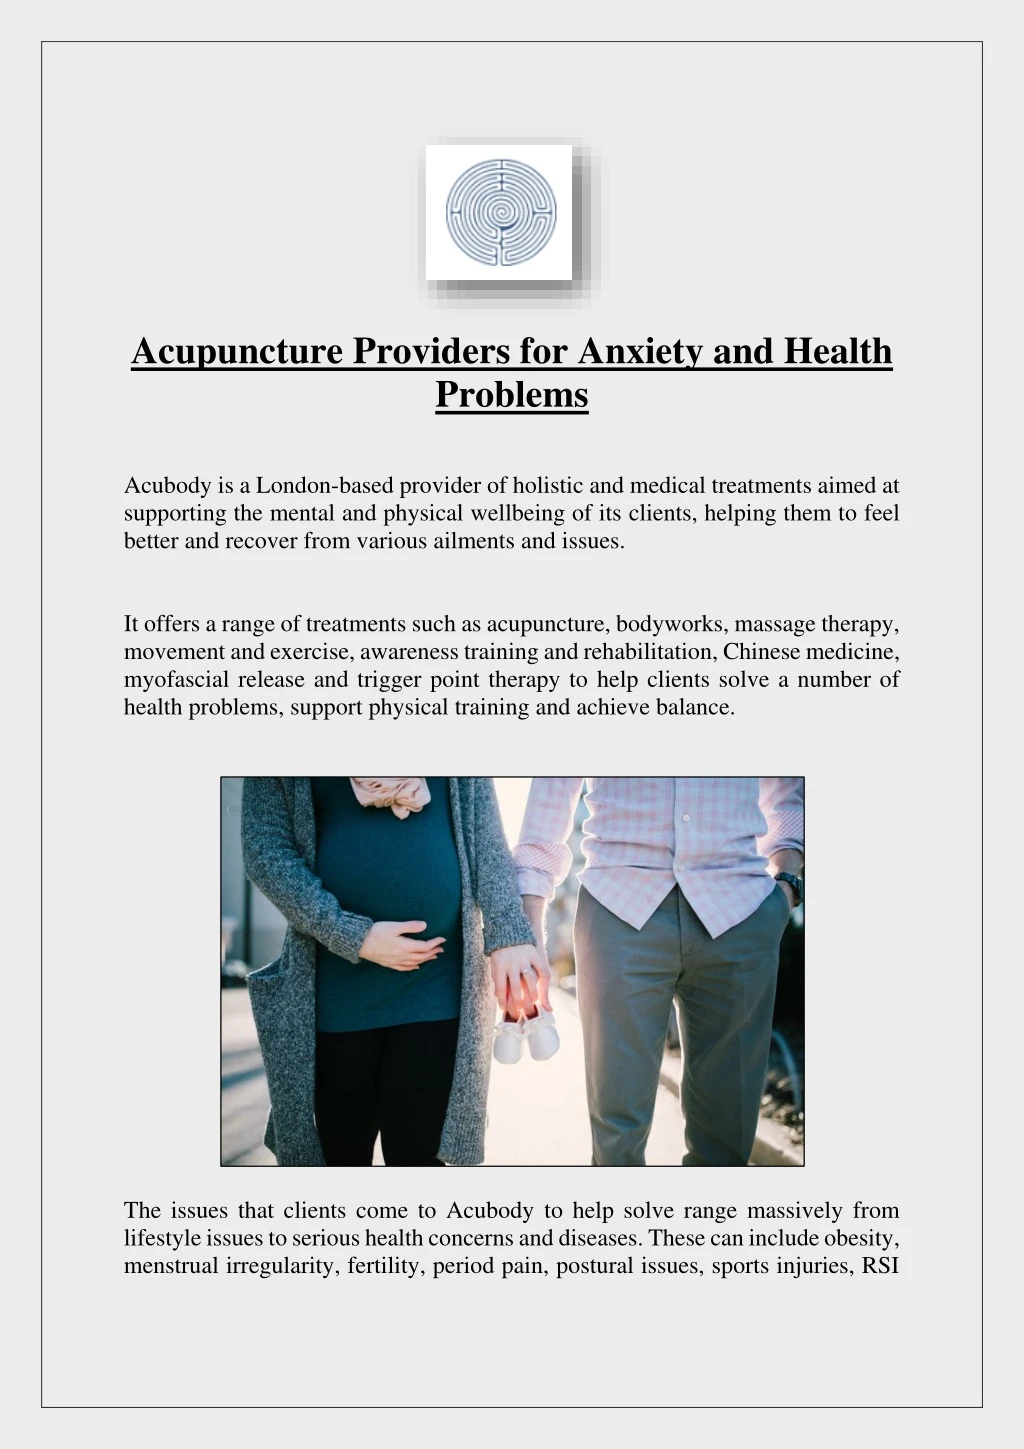 acupuncture providers for anxiety and health